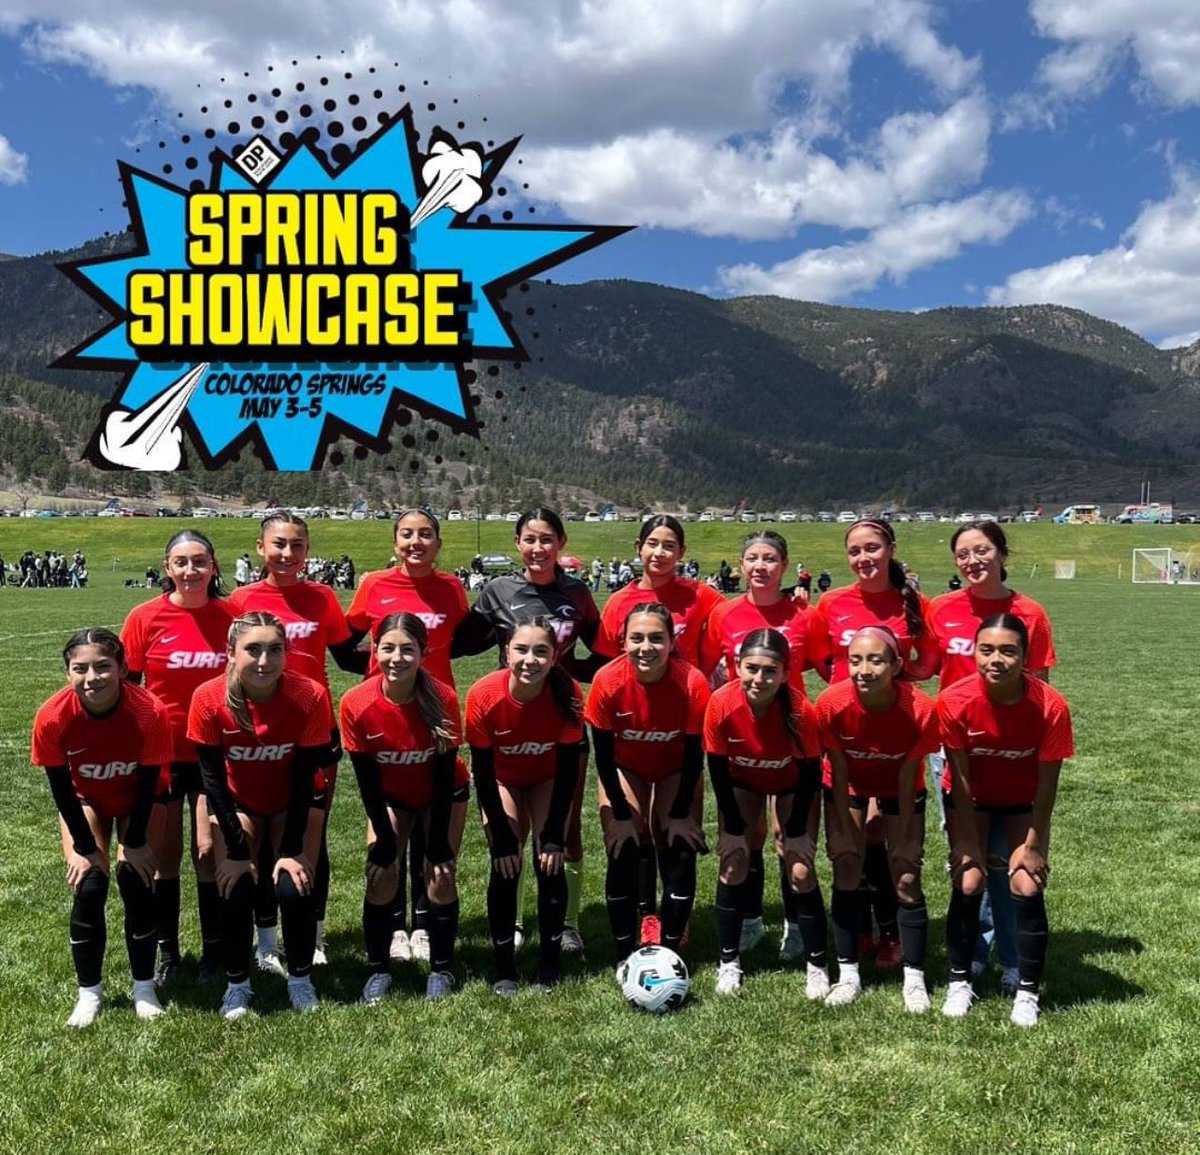 Do my little eyes see @Deina_2007 competing in Colorado 💪🏼♥️ Best of luck to you & your team 🏆 @YsletaSports @avalos2oofresh @SoccerMomInt @YsletaHS @NCAASoccer @Prep1USA @NMStateWSOC @ImYouthSoccer